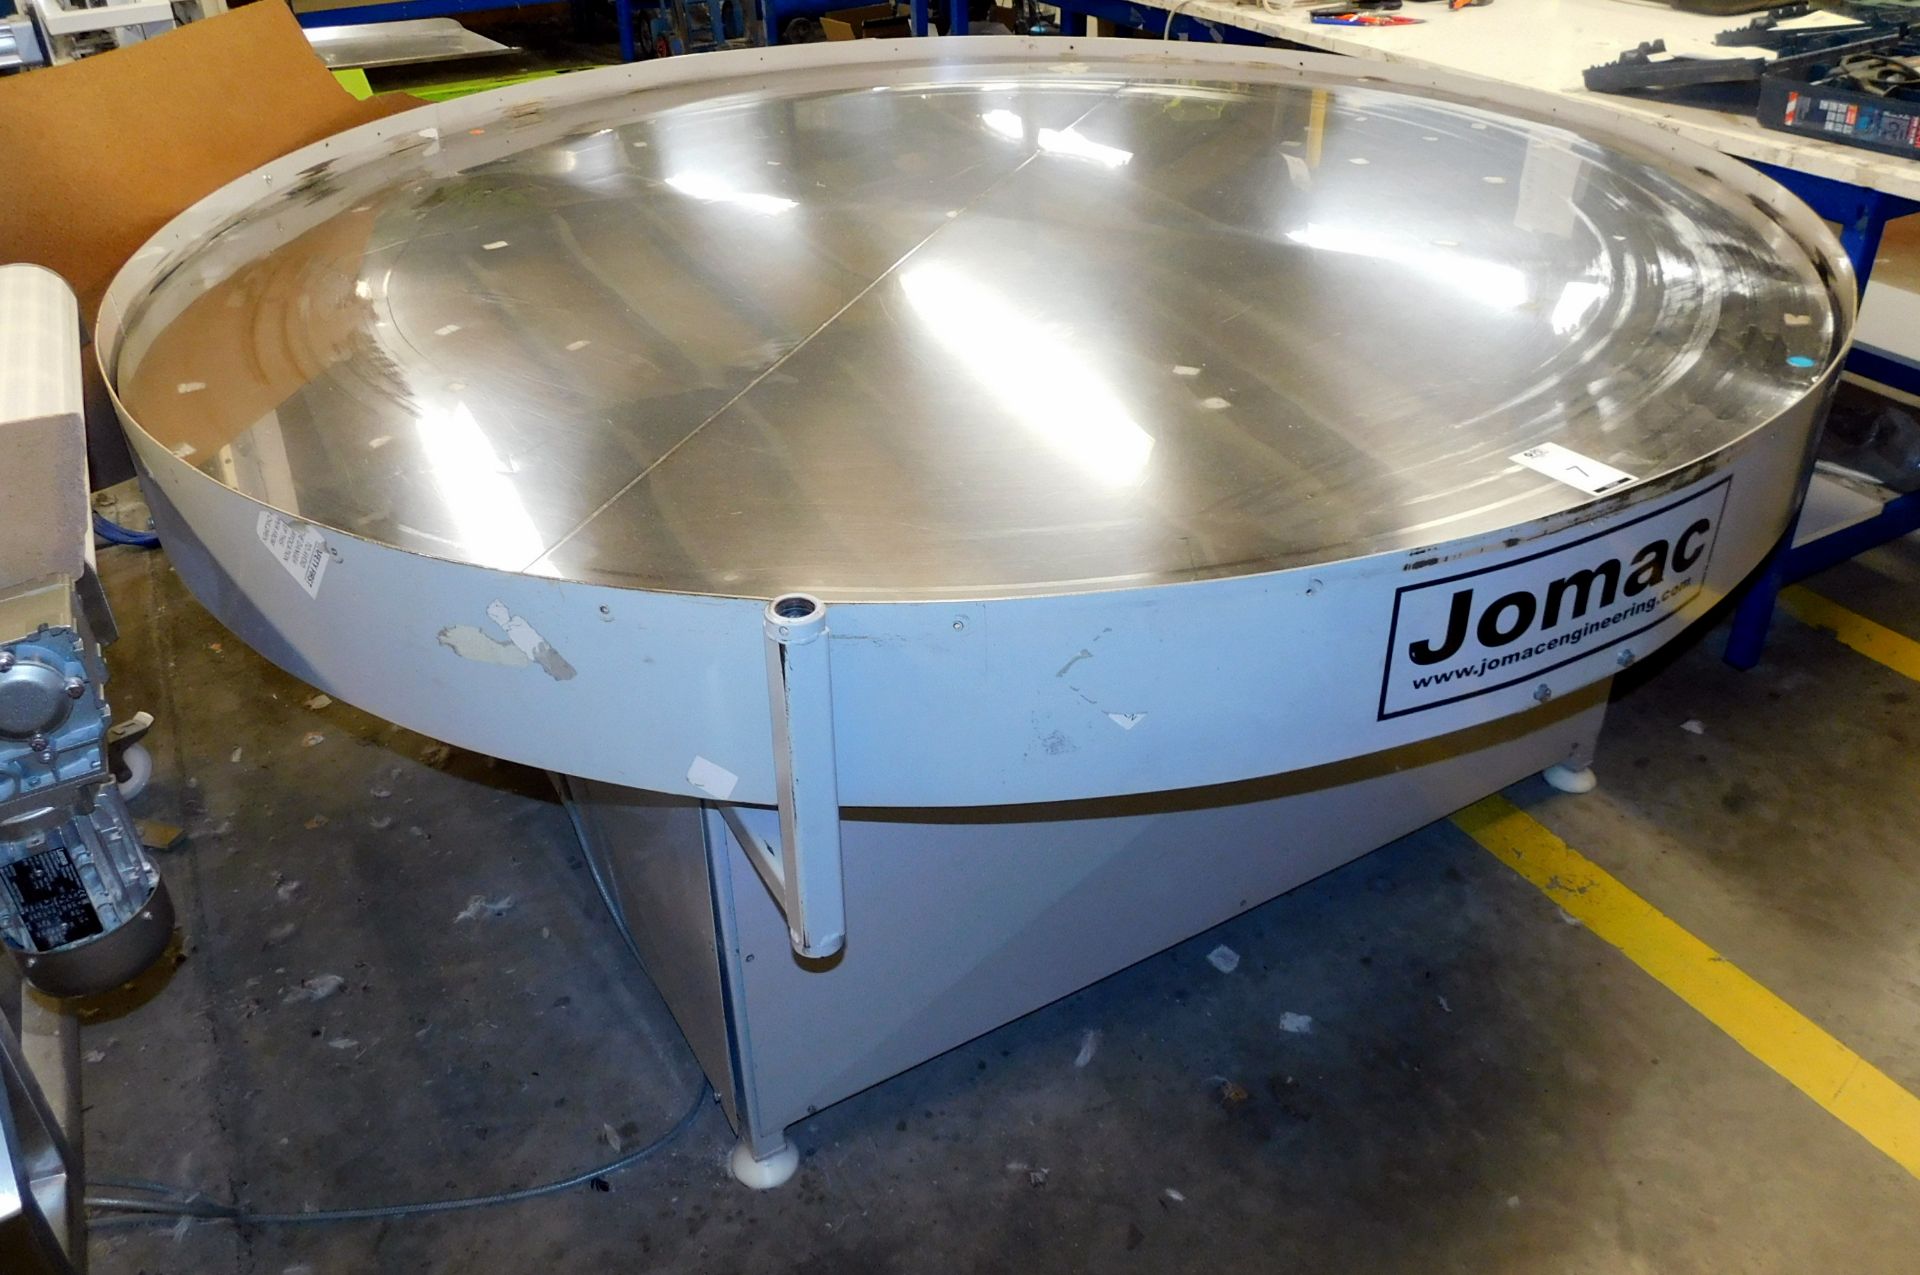 Jomac Rotary Turntable, Stainless Steel (Location Diss. Please Refer to General Notes) - Image 3 of 3